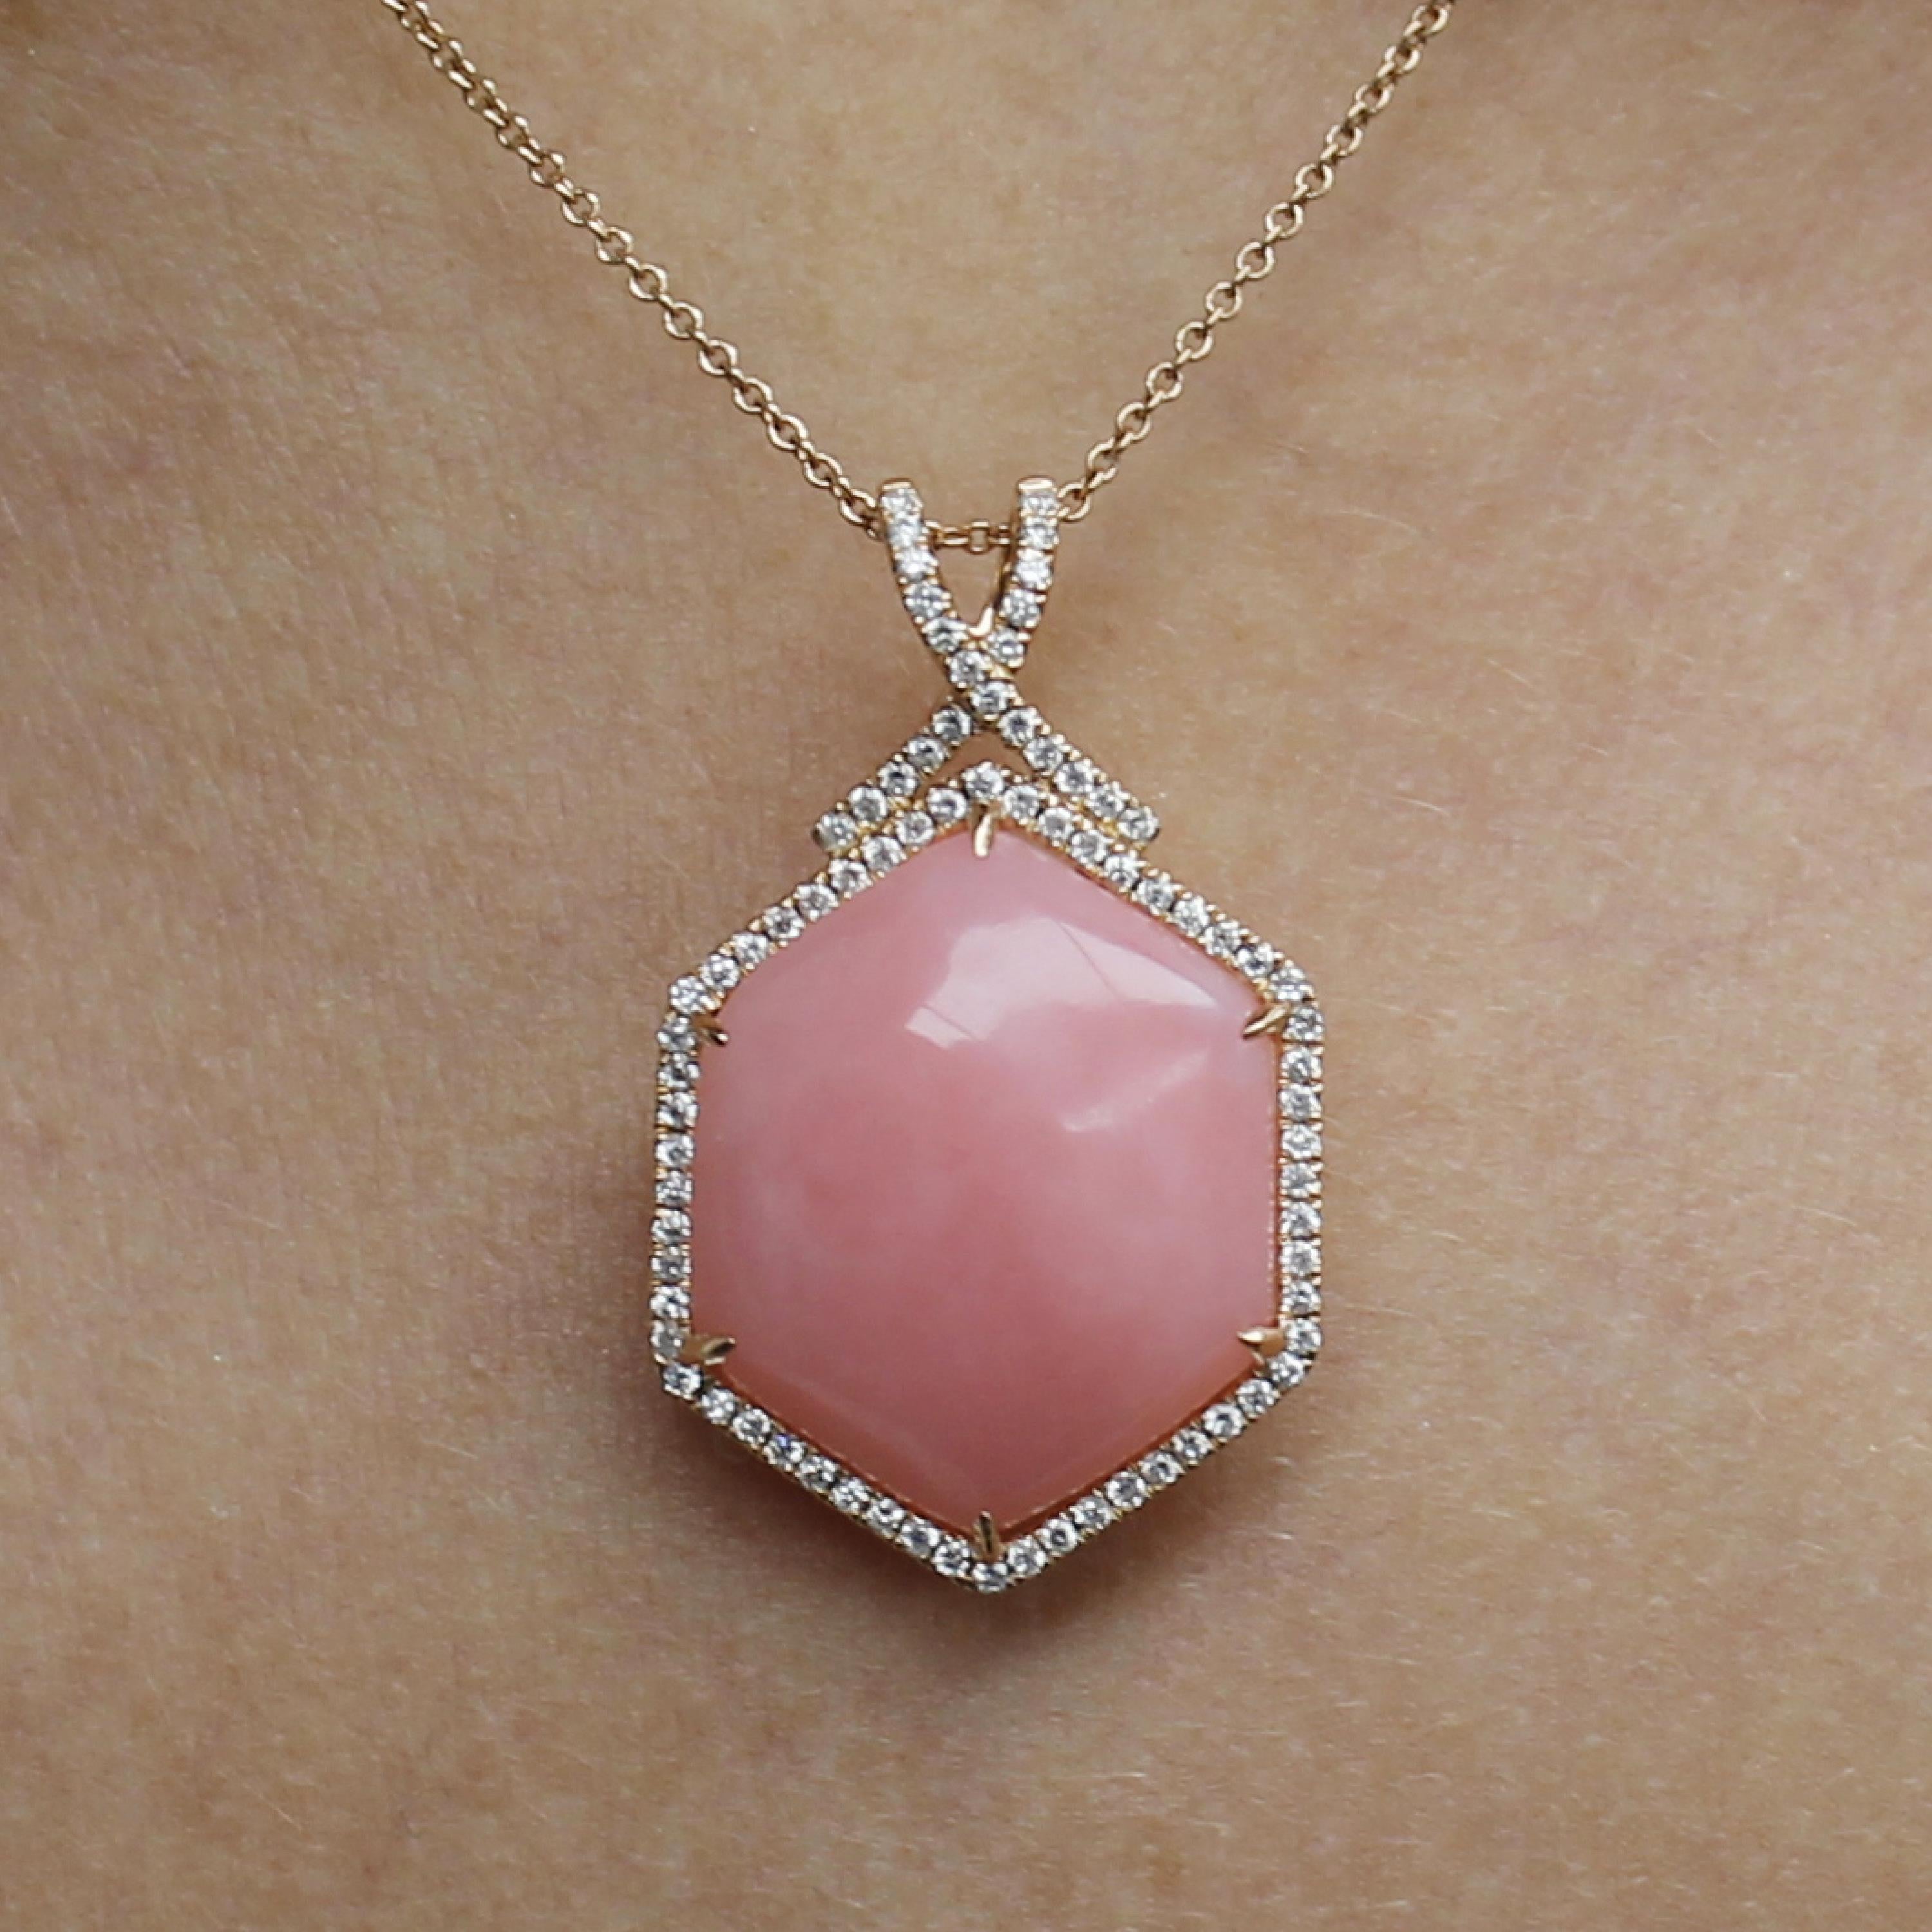 18 Karat Rose Gold Hexagon Pendant Necklace with Cabochon Pink Opal and  Diamonds